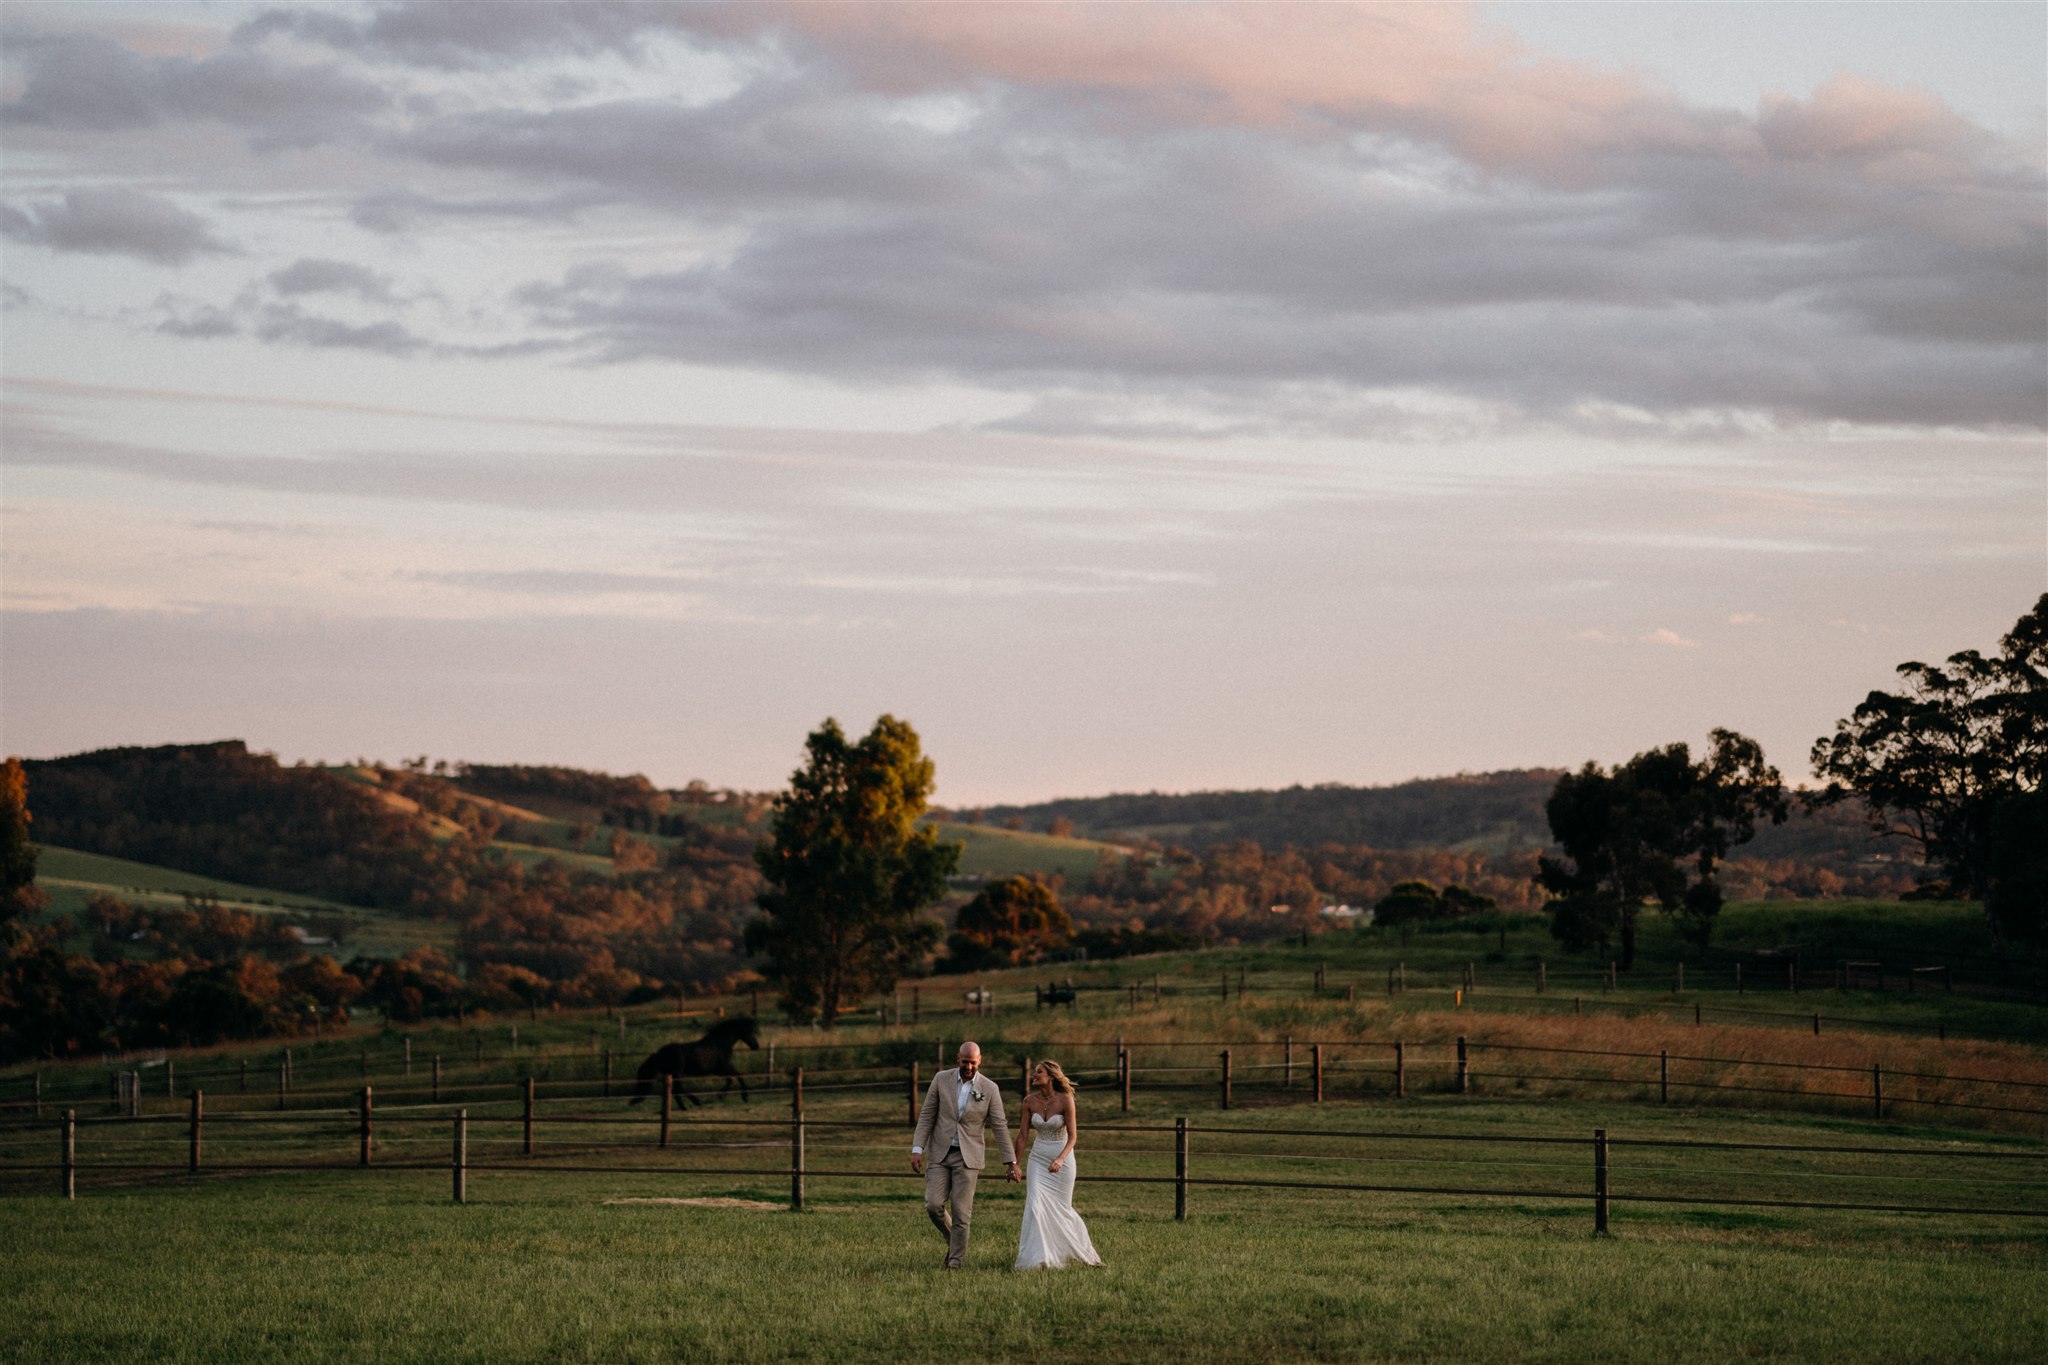 Secret Horse Stud, Brin Farm, Wedding Venue located just around the corner from Clarendon, Kuitpo Forest and Kangarilla offering flexible spaces, BYO alcohol, catering and suppliers.